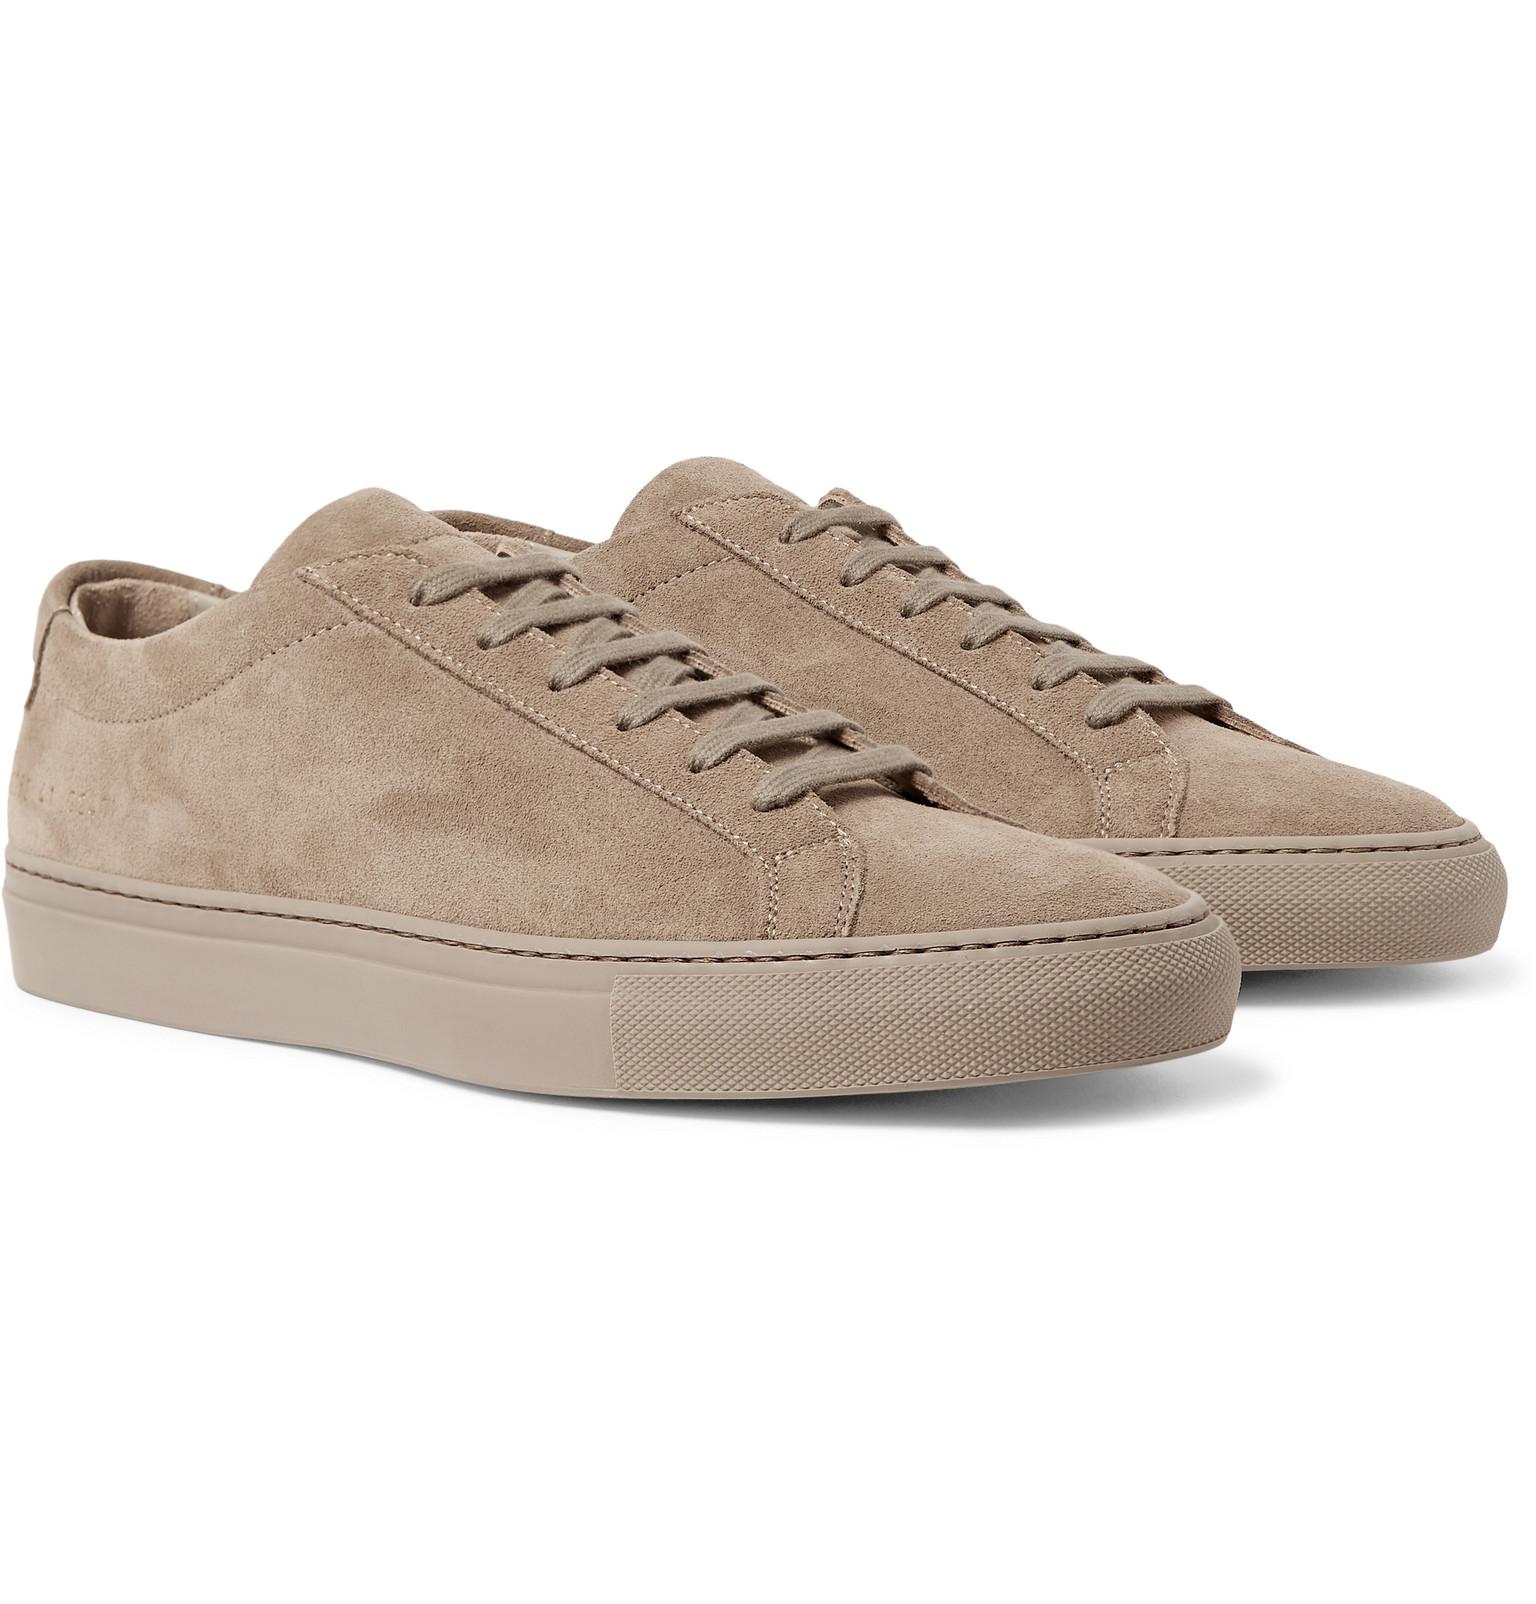 Common Projects Original Achilles Suede Sneakers in Brown for Men - Lyst